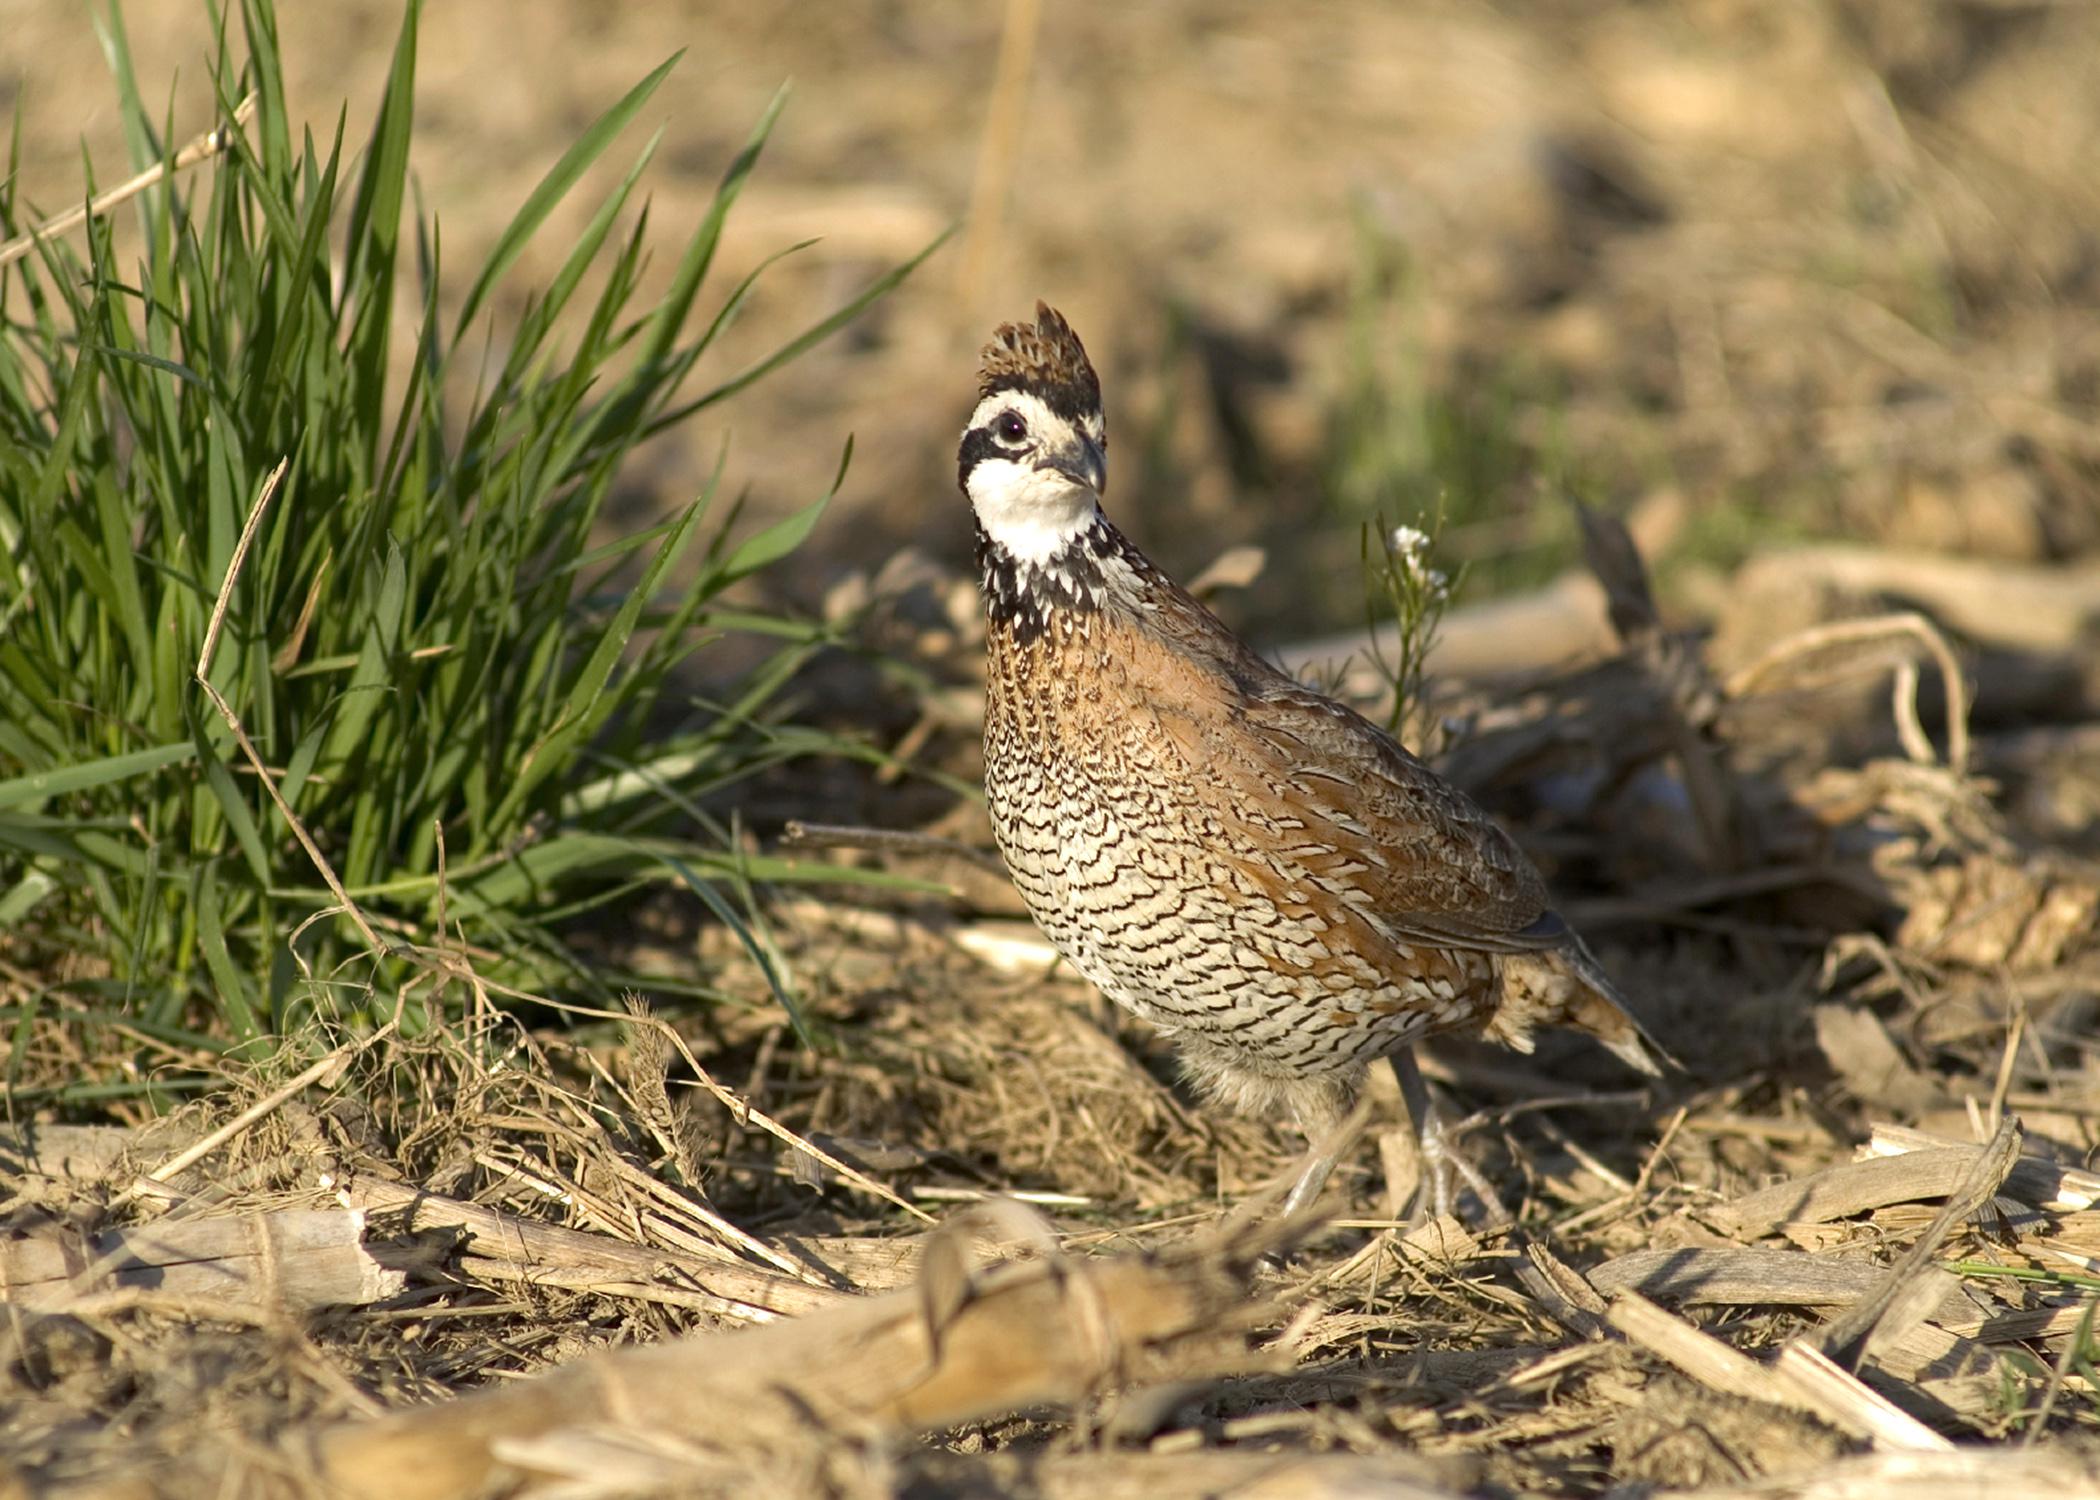 The conservation practice known as CP33 is showing significant results in increasing the bobwhite quail population of the state. (Photo by MSU University Relations/Russ Houston)